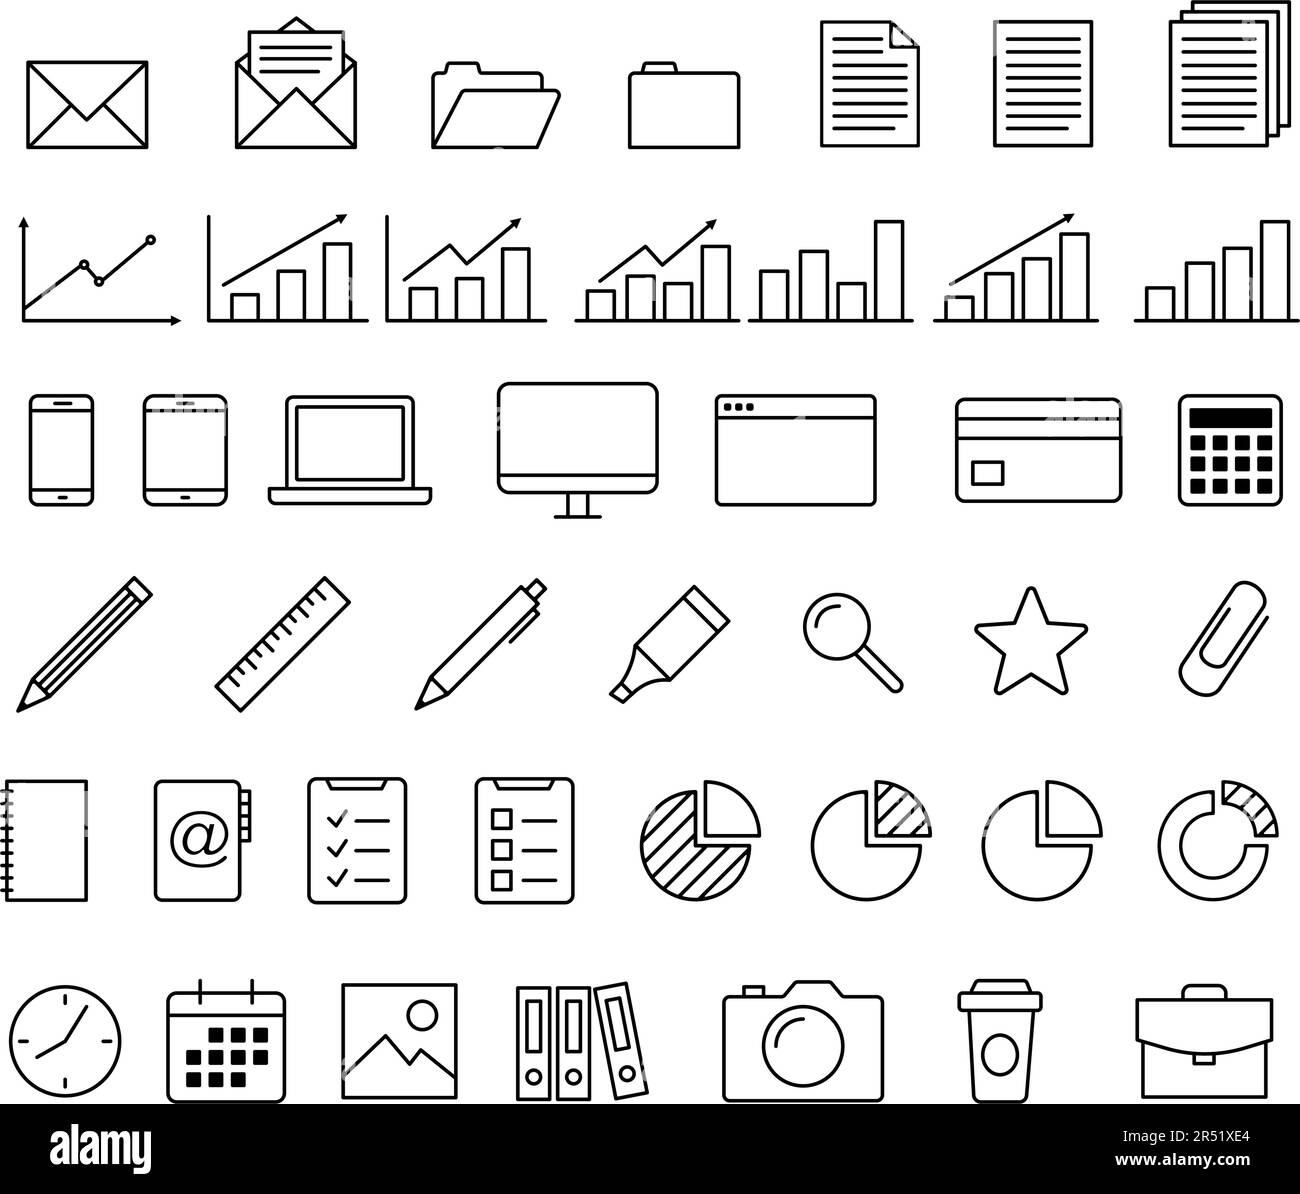 Set of office icons. Vector illustration Stock Vector